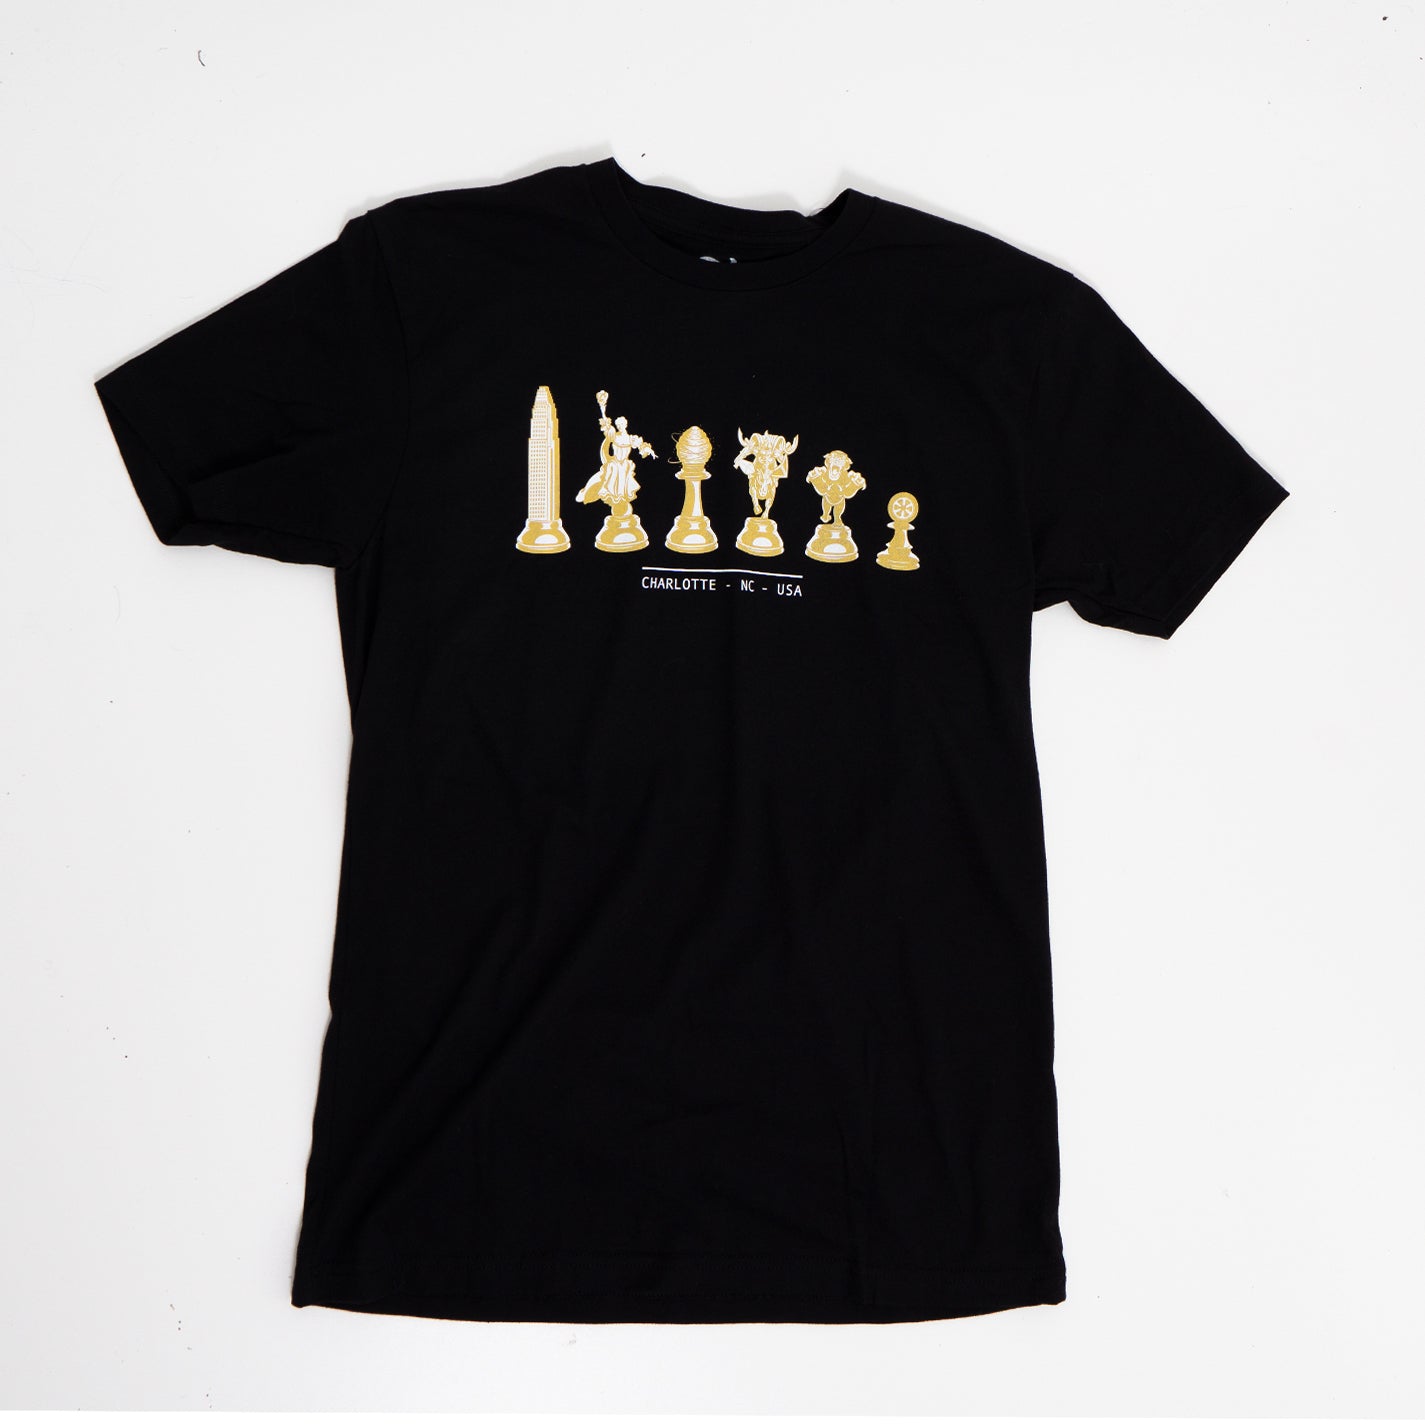 The Checkmate Tee